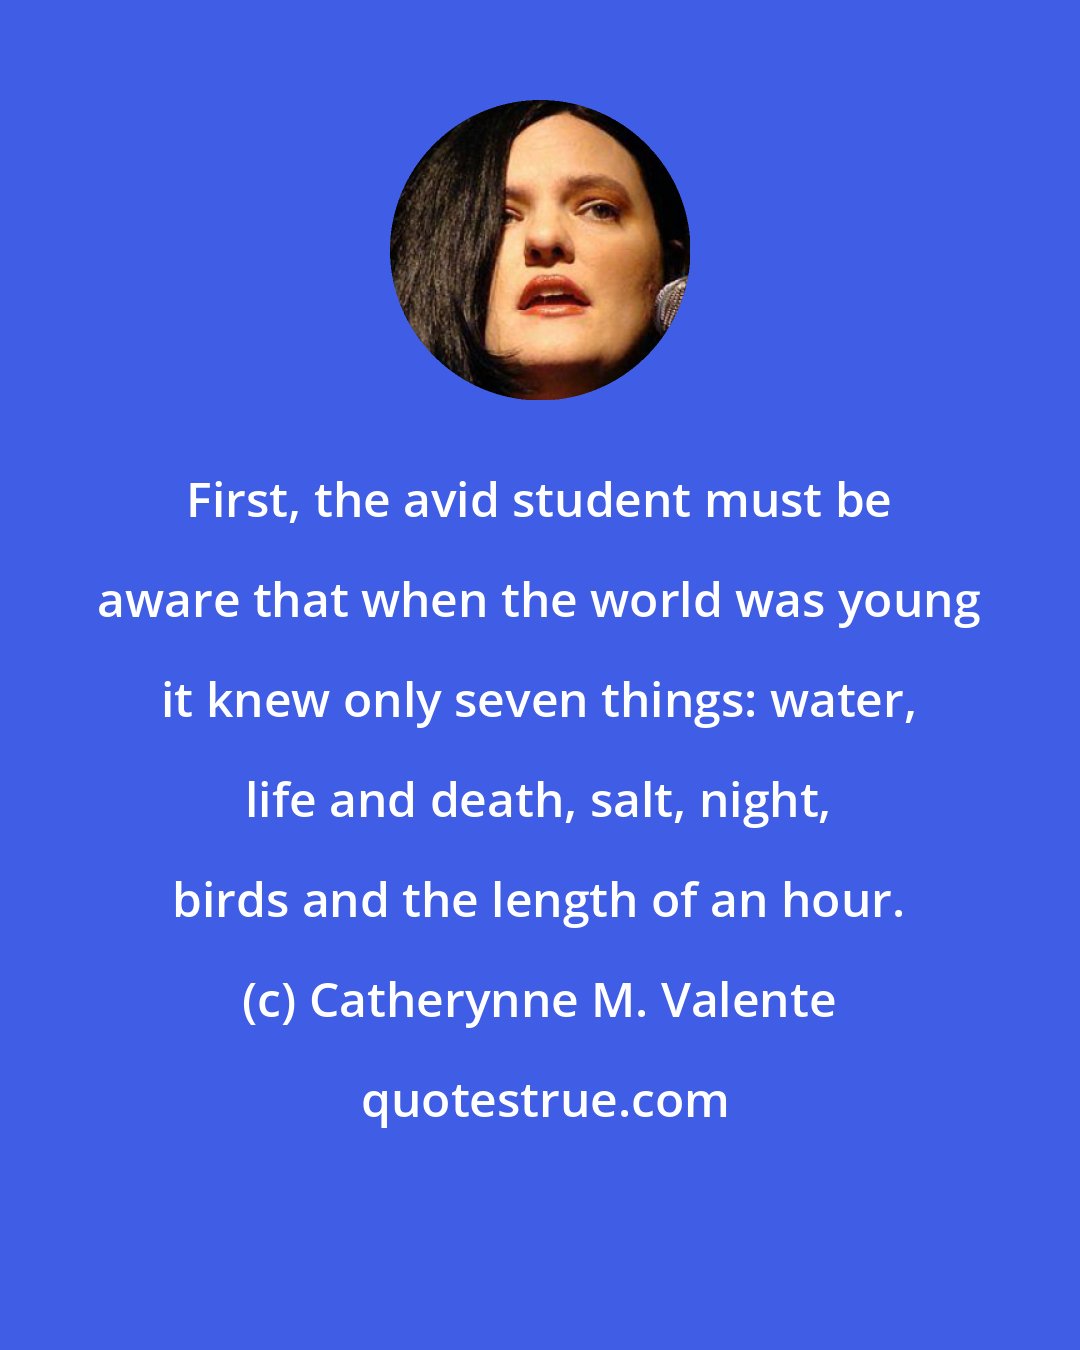 Catherynne M. Valente: First, the avid student must be aware that when the world was young it knew only seven things: water, life and death, salt, night, birds and the length of an hour.